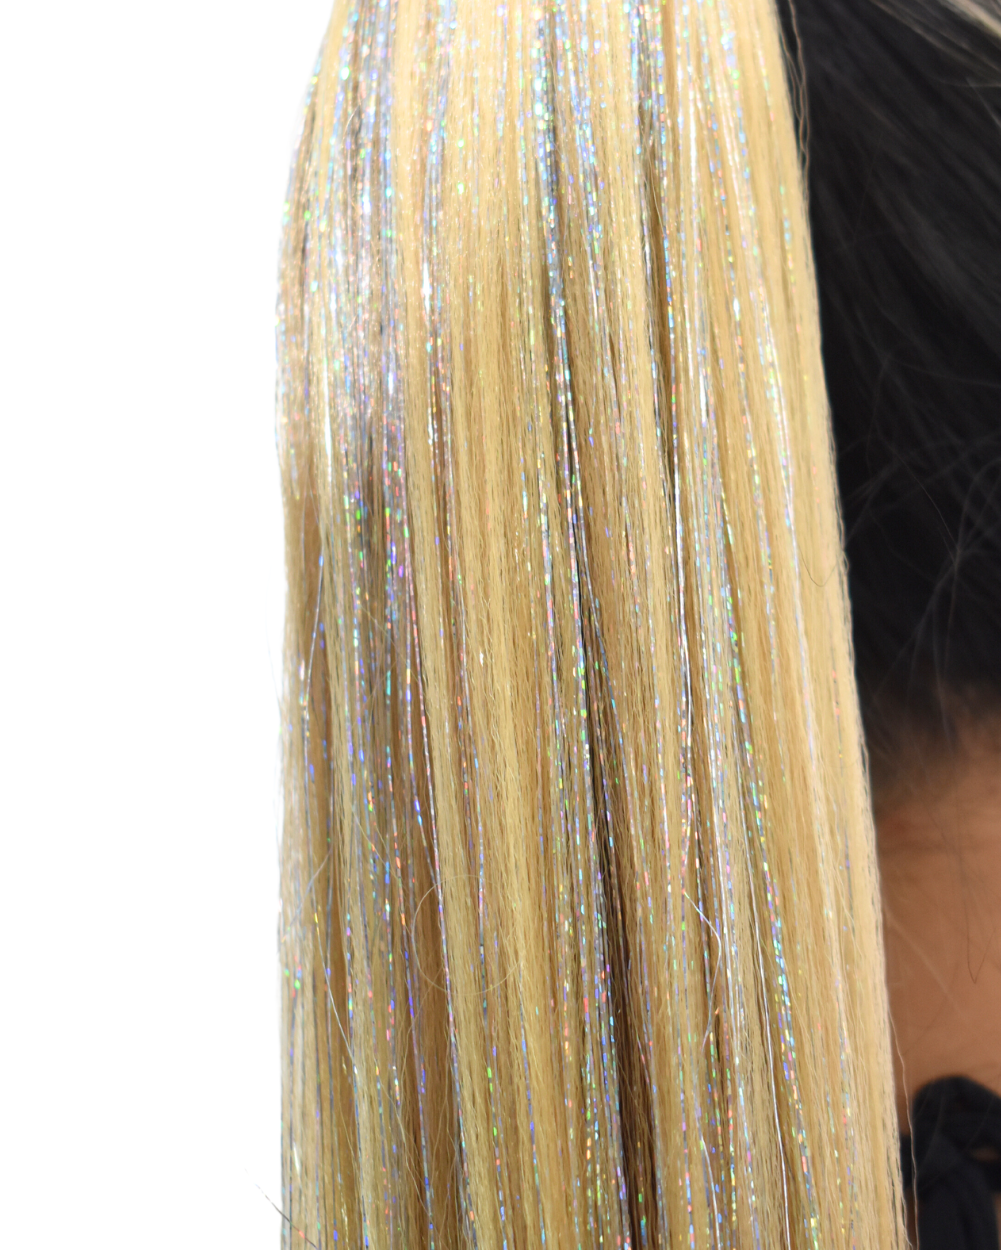 Champagne Sparkle - Blonde Ponytail Hair Extension with Silver Tinsel